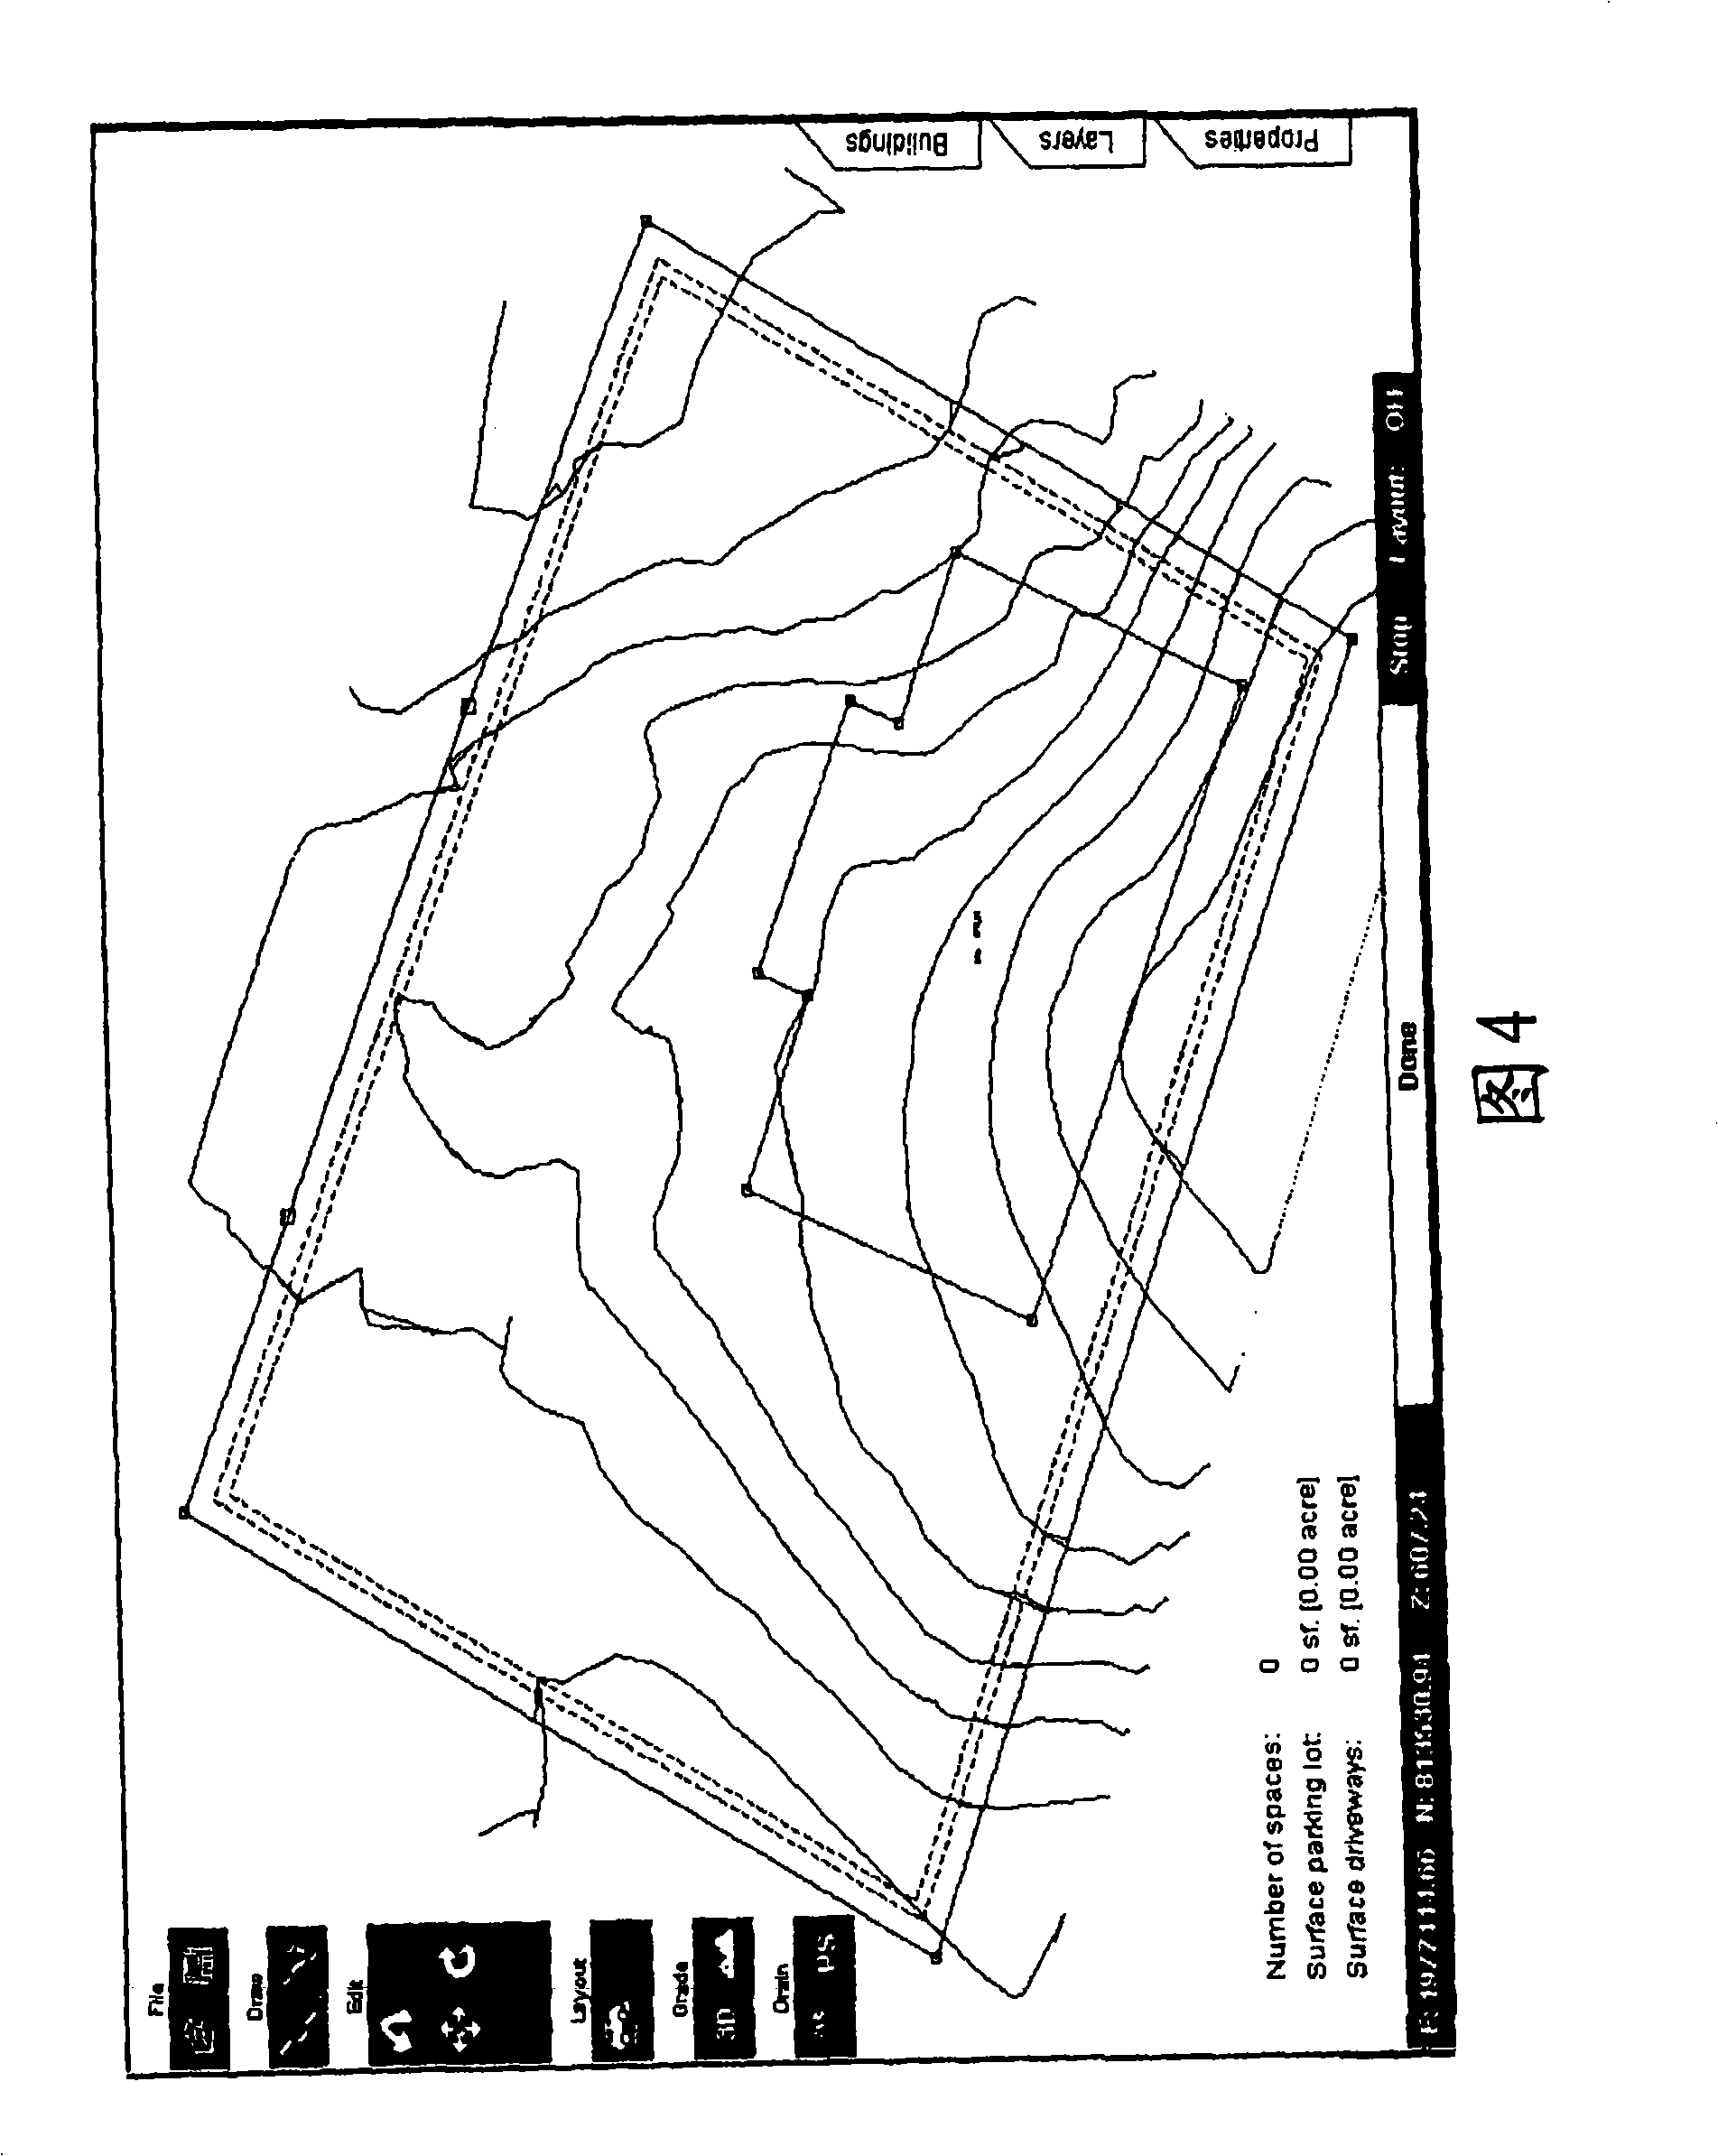 Computer-implemented land planning system and method